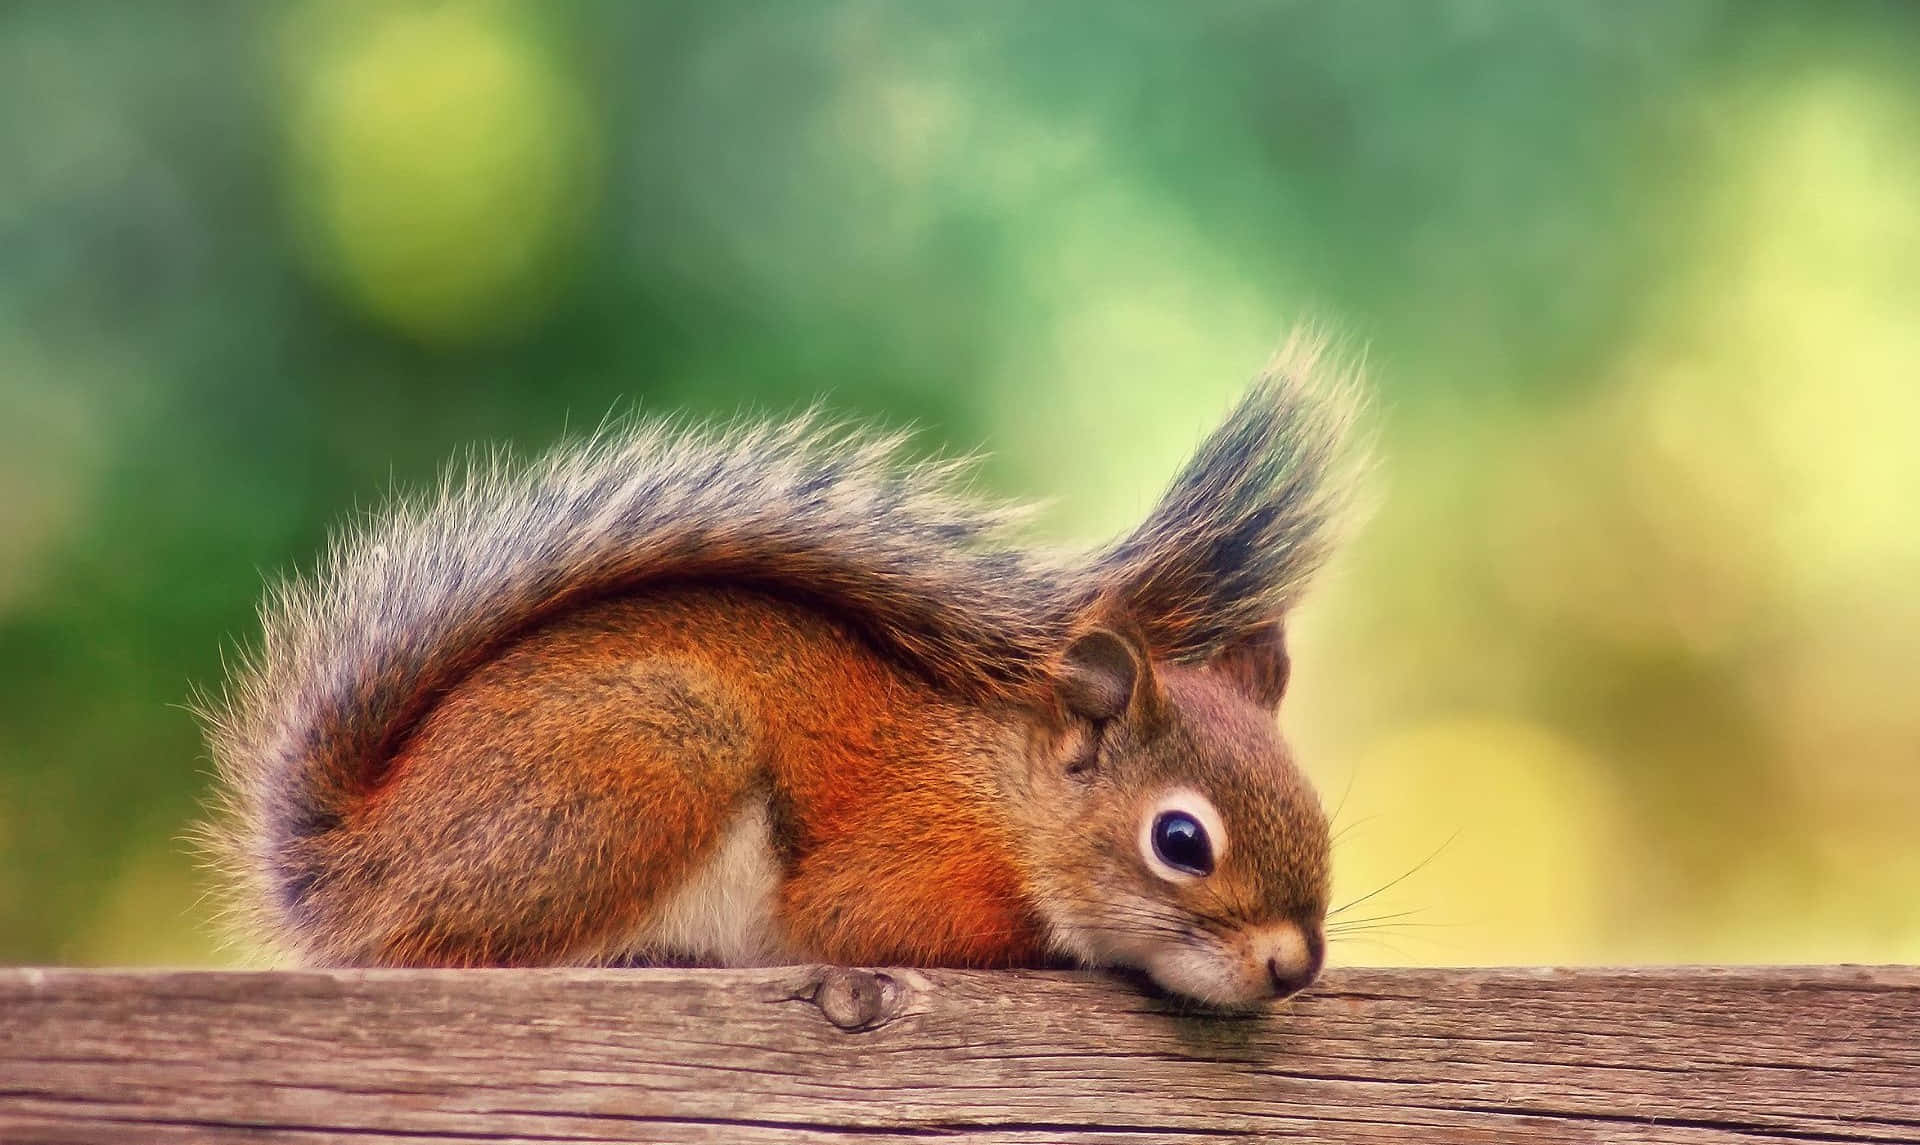 Funny Squirrel On Wood Pictures